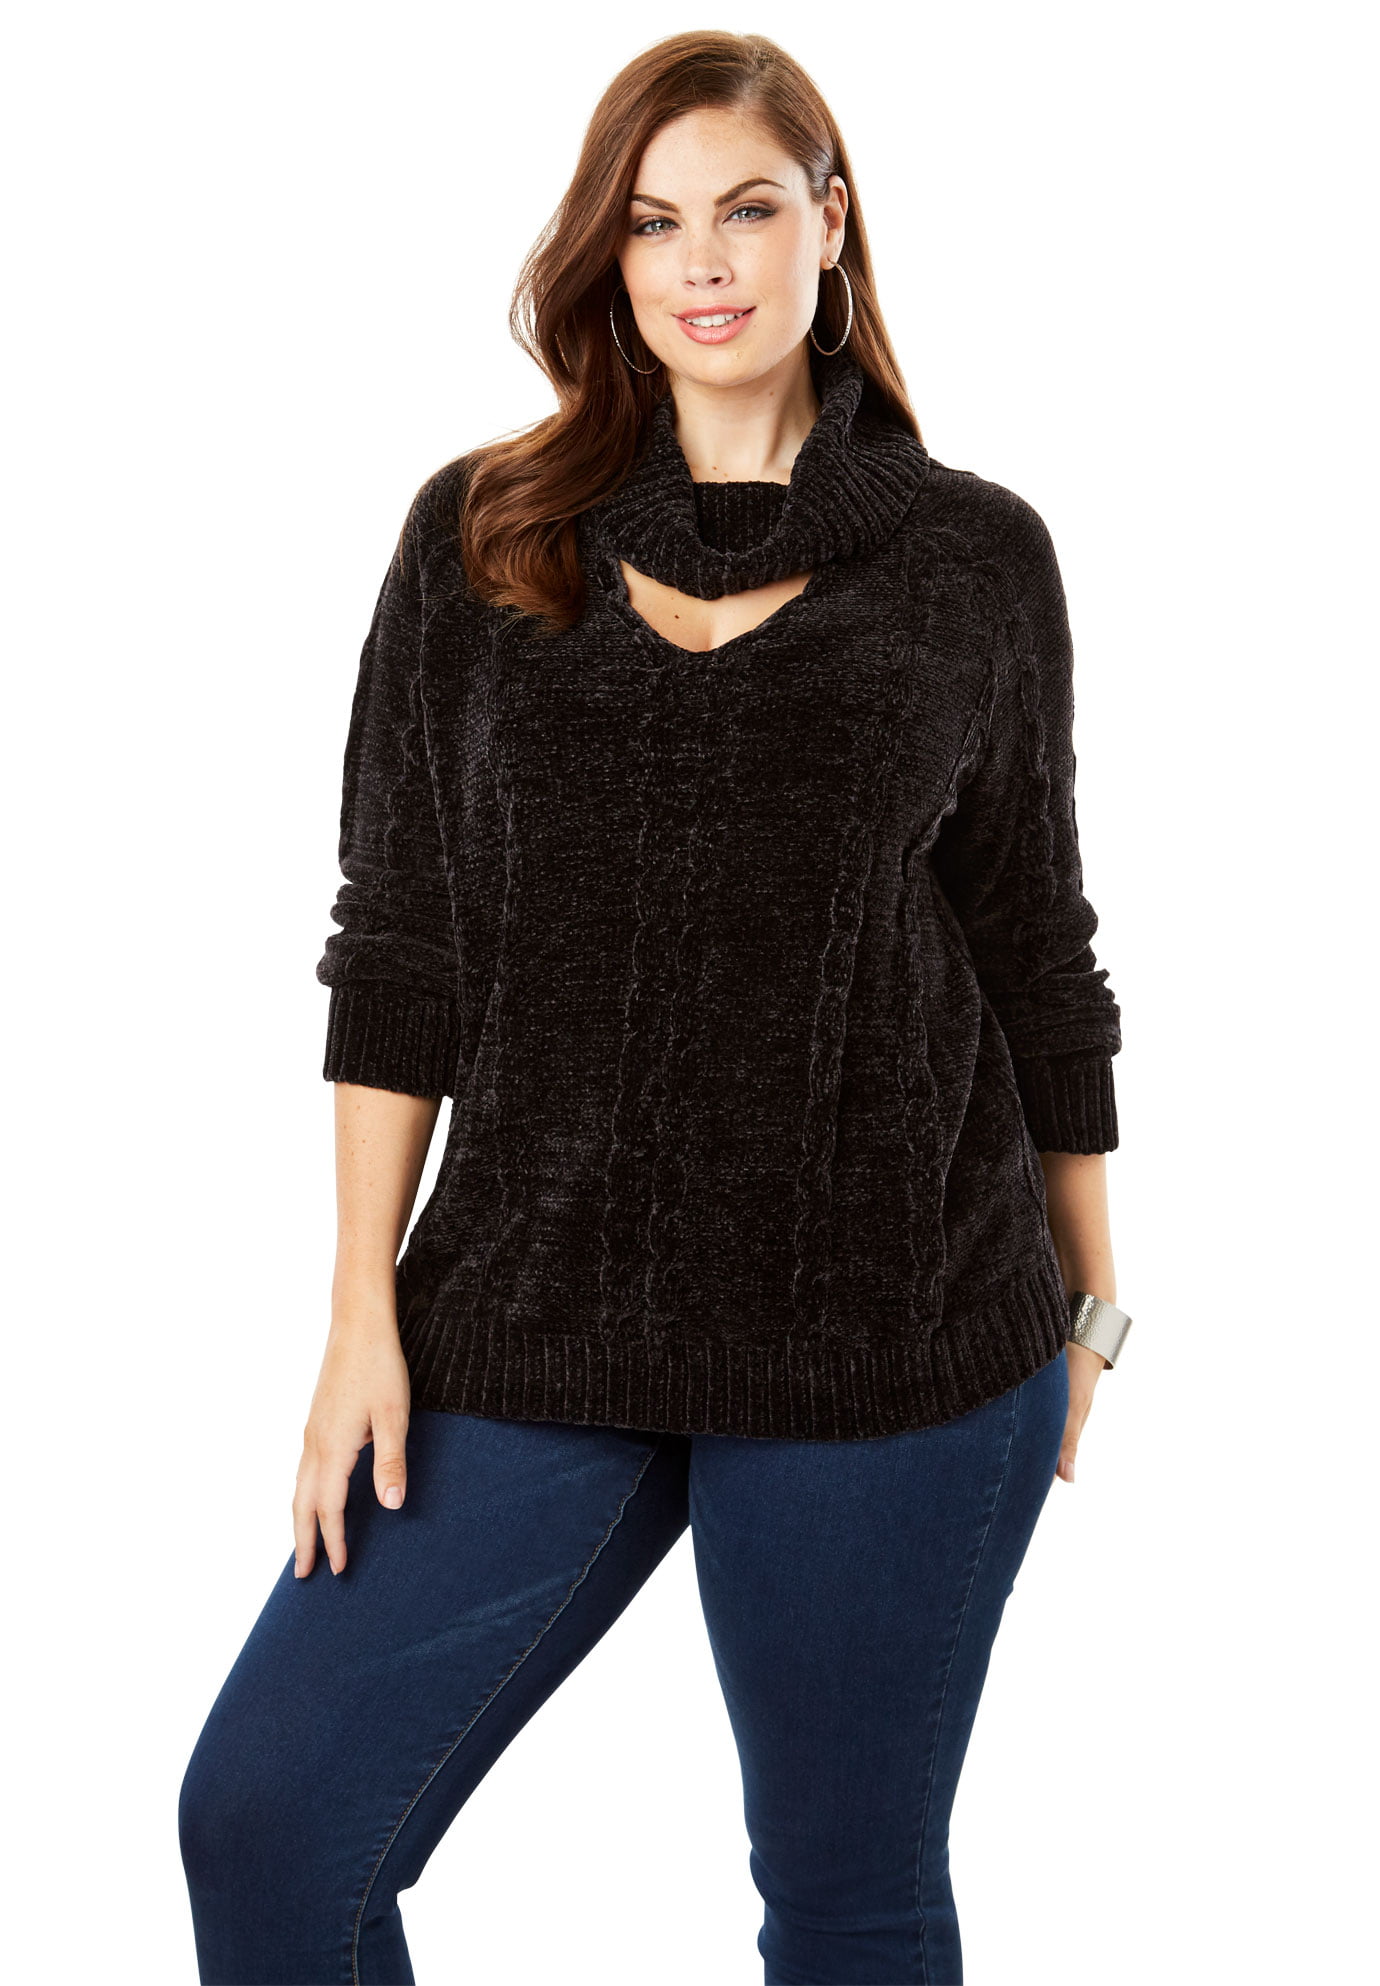 Roamans Womens Plus Size Cowlneck Sweater with Bell Sleeves